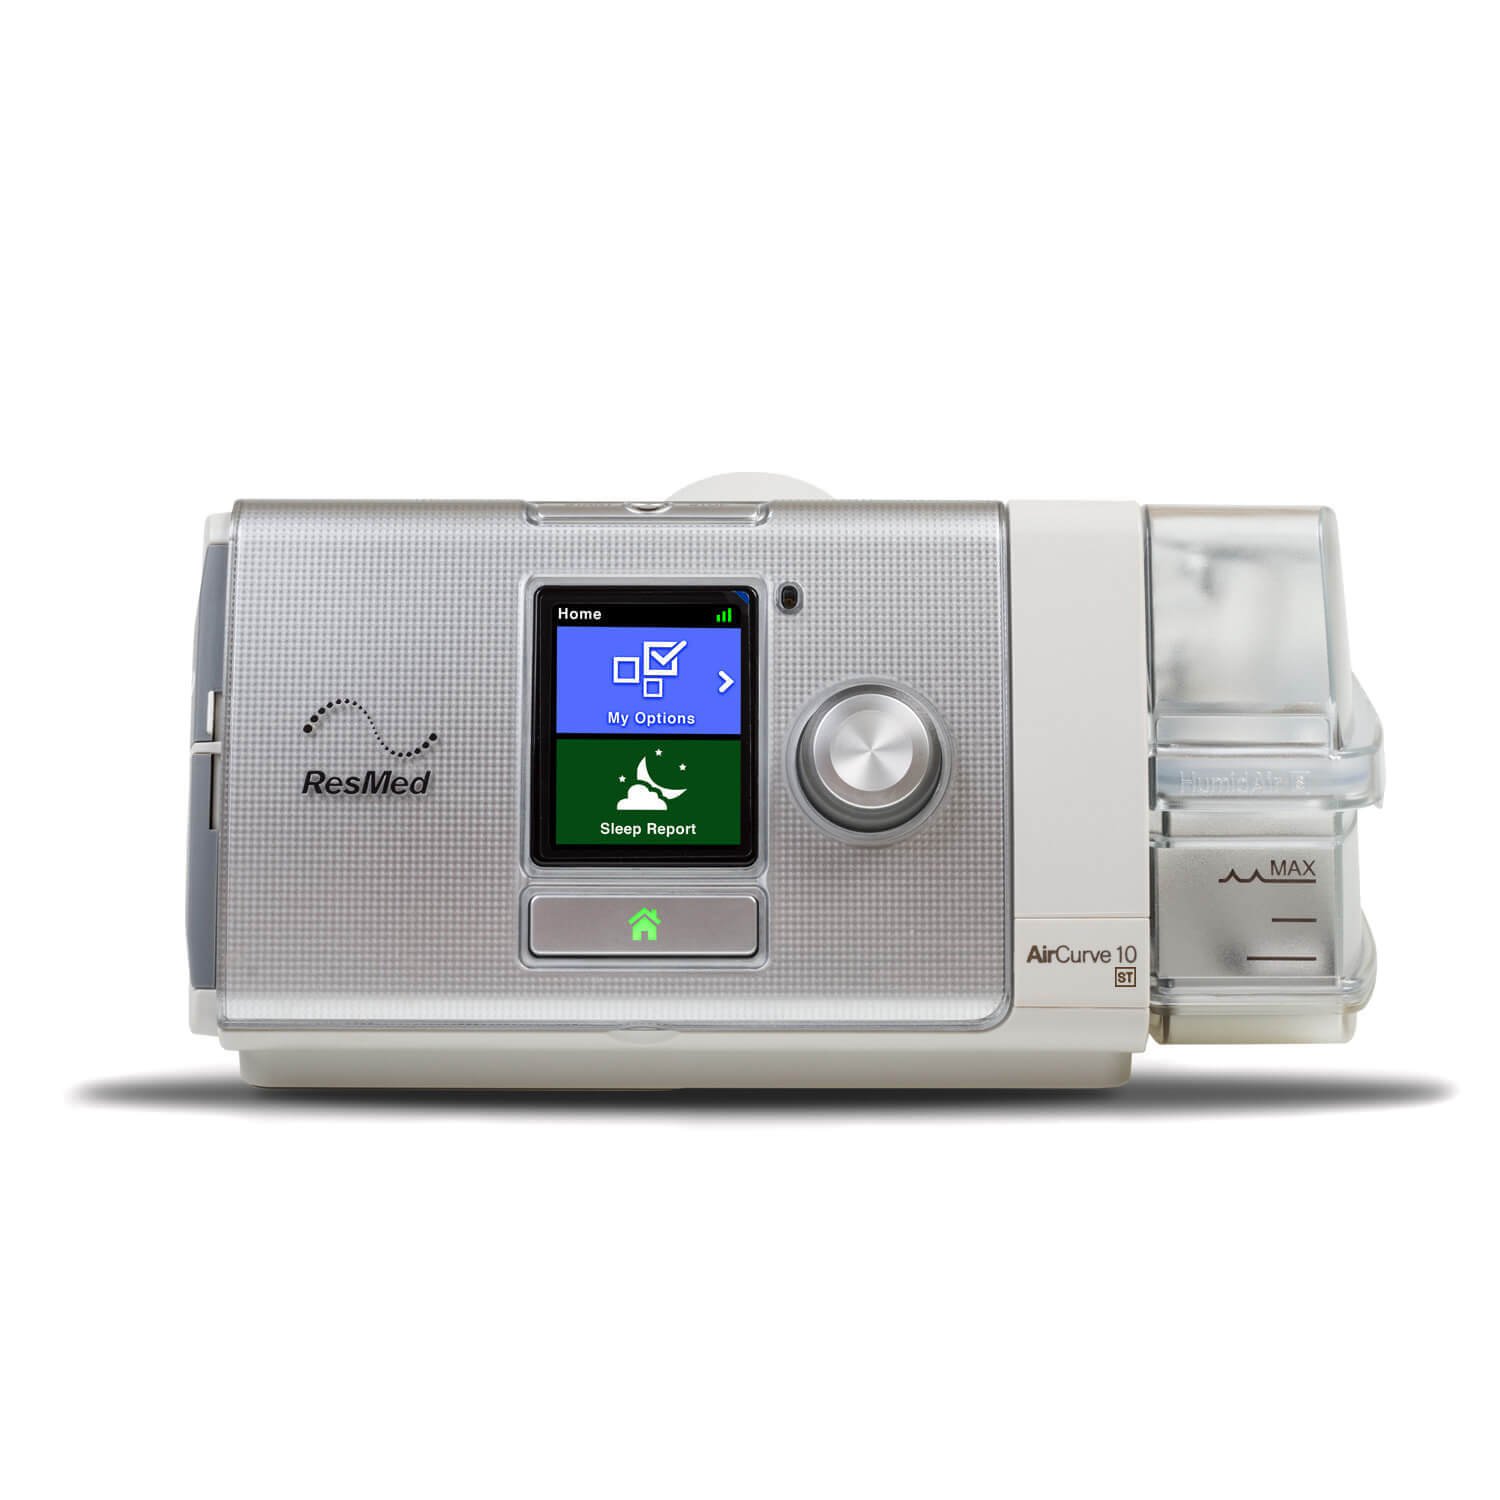 Brand New AirCurve 10 ST Machine with HumidAir Heated Humidifier